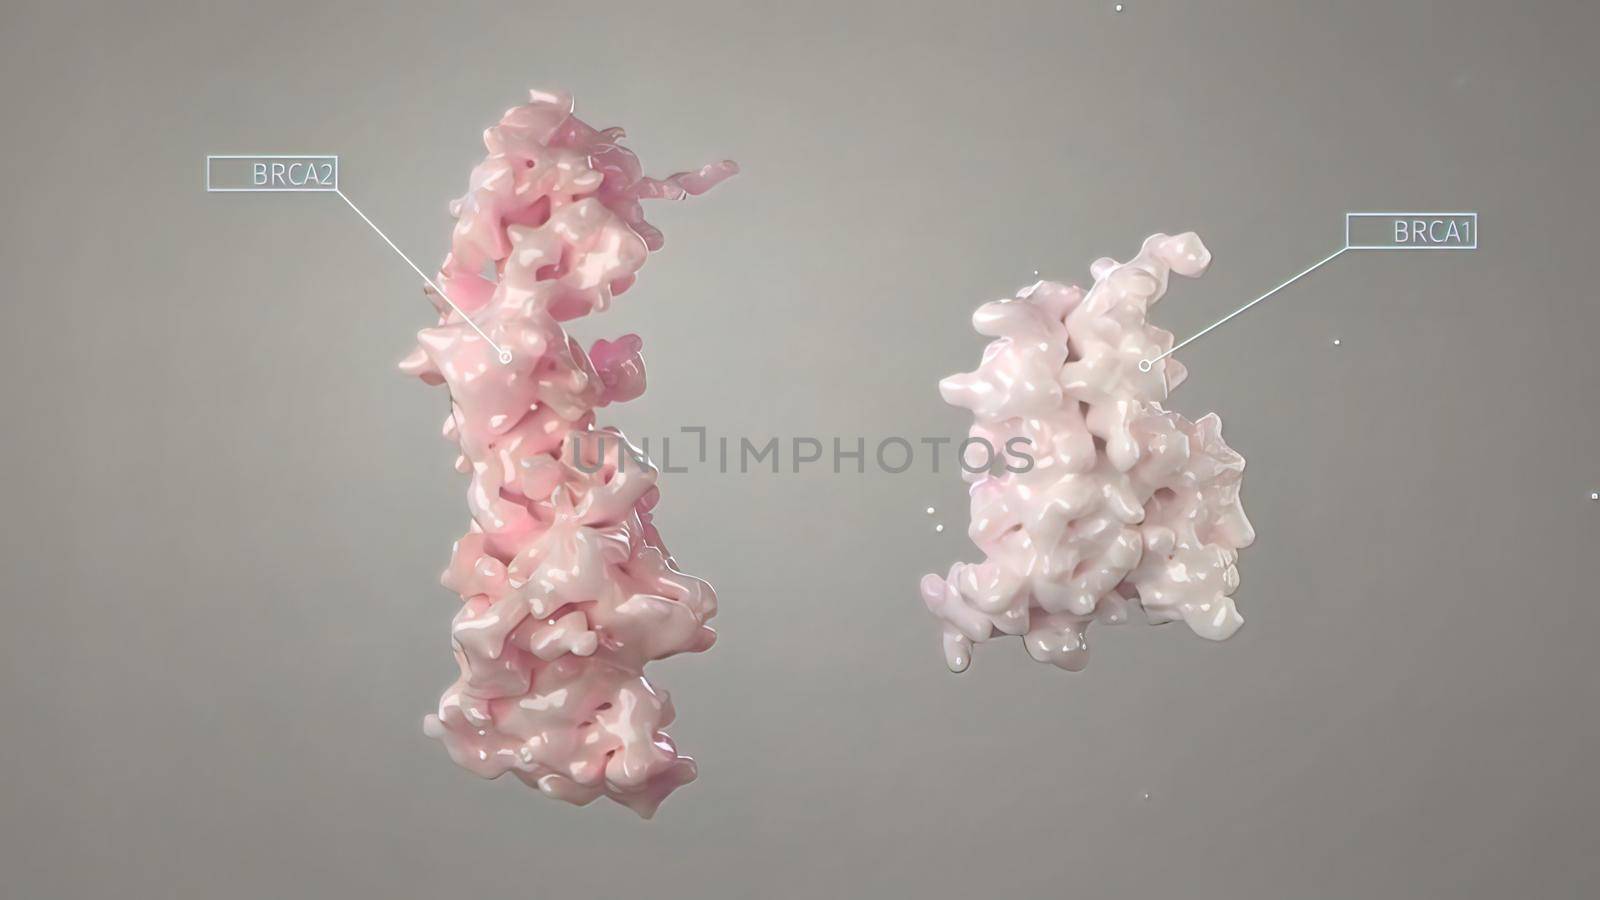 3D Medical illustration of Breast cancer genes by creativepic